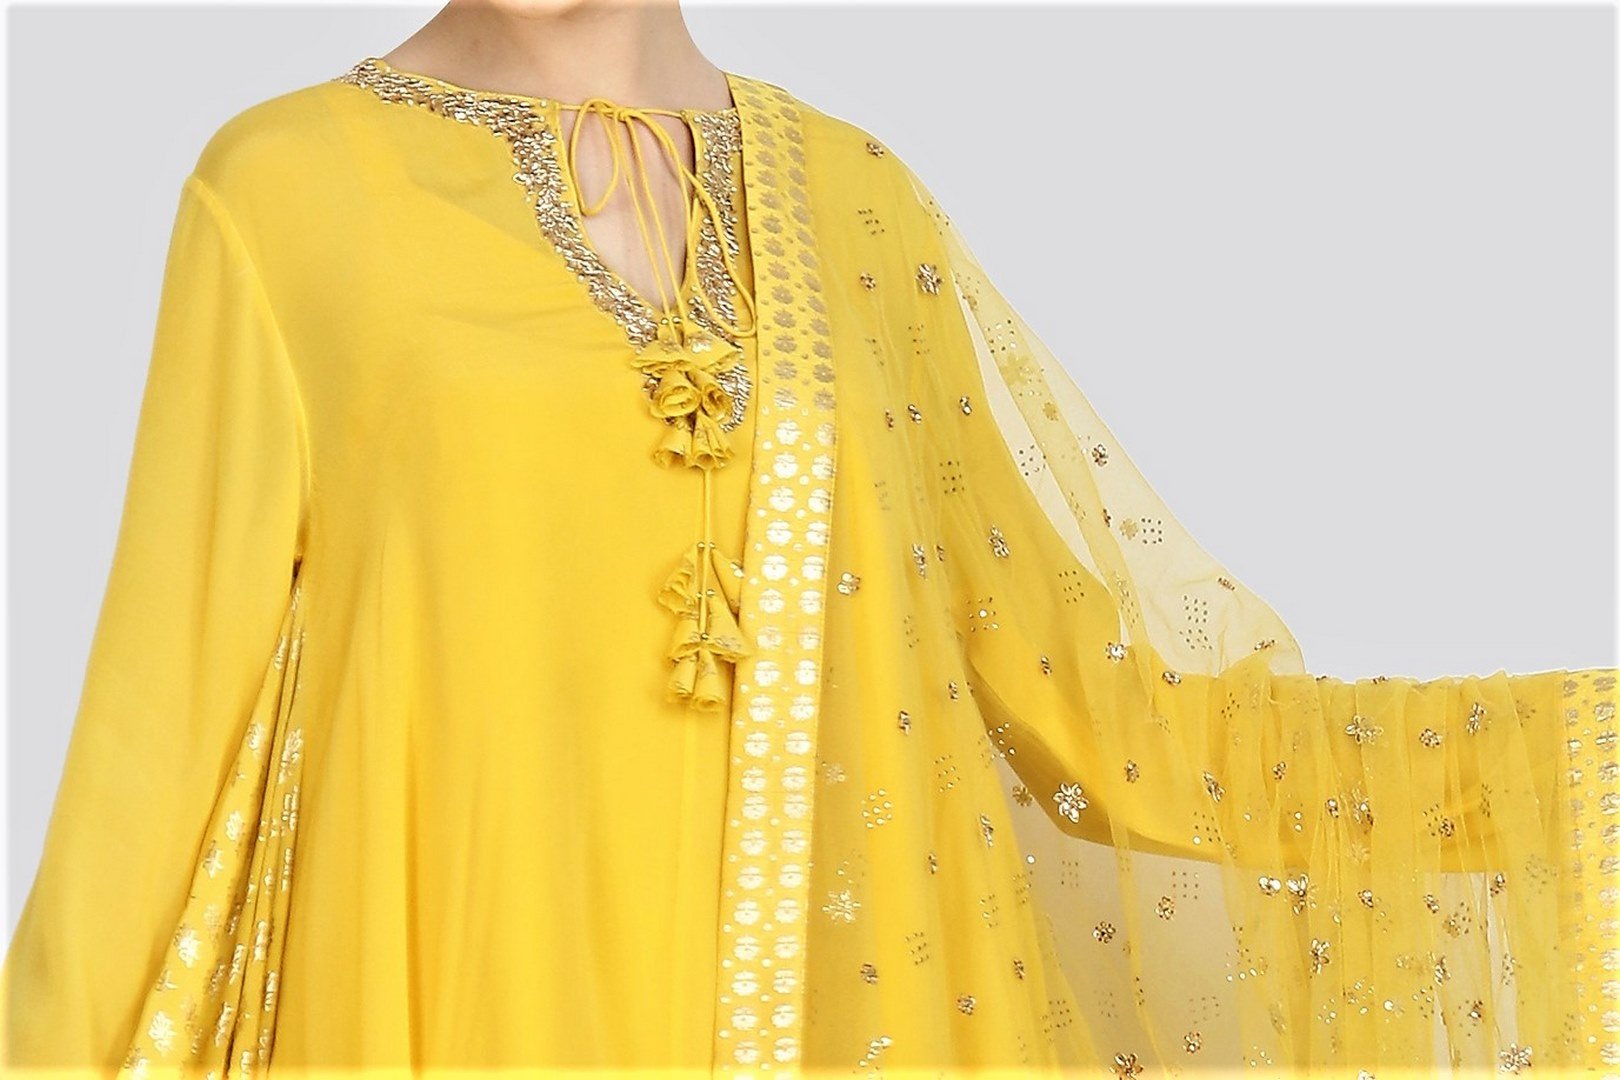 Buy yellow foil print asymmetric kurta with sharara online in USA and net dupatta. For more such gorgeous designer dresses, shop at Pure Elegance Indian fashion store in USA. A beautiful range of traditional Indian sarees and designer clothing is available for Indian women living in USA. You can also shop at our online store.-kurta